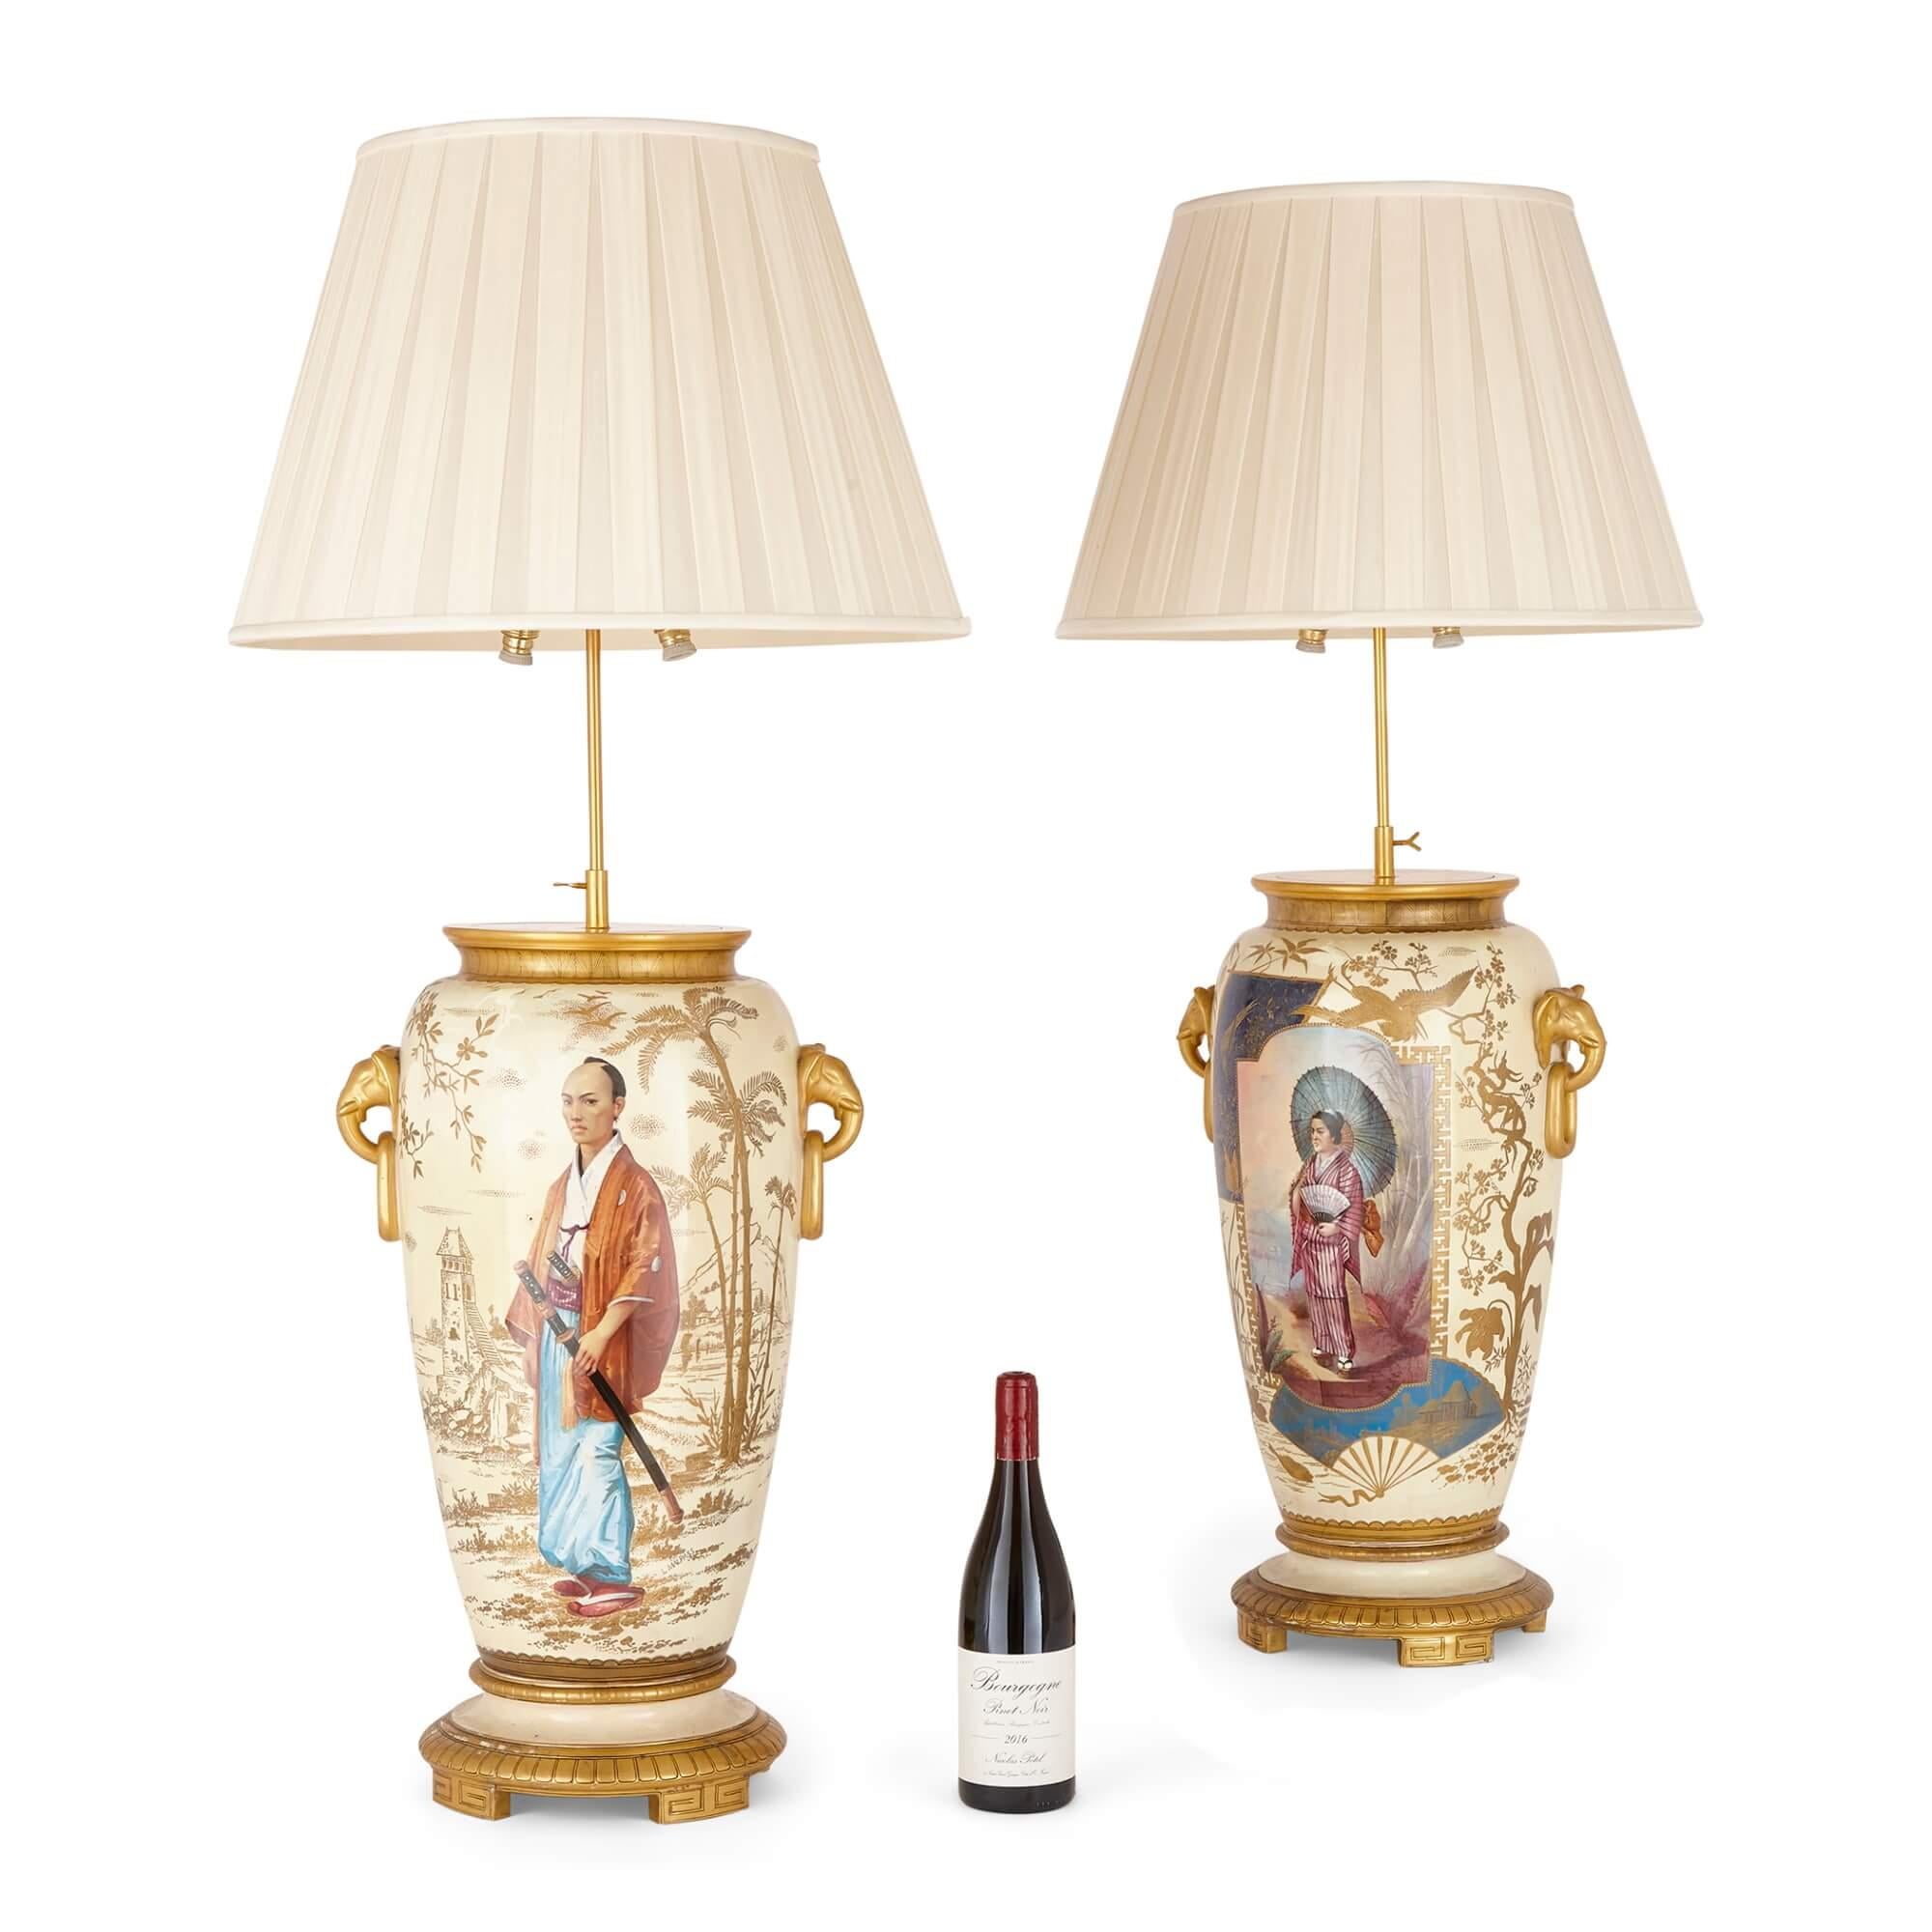 Pair of French Antique Japonisme Glazed Ceramic and Ormolu Mounted Lamps For Sale 4